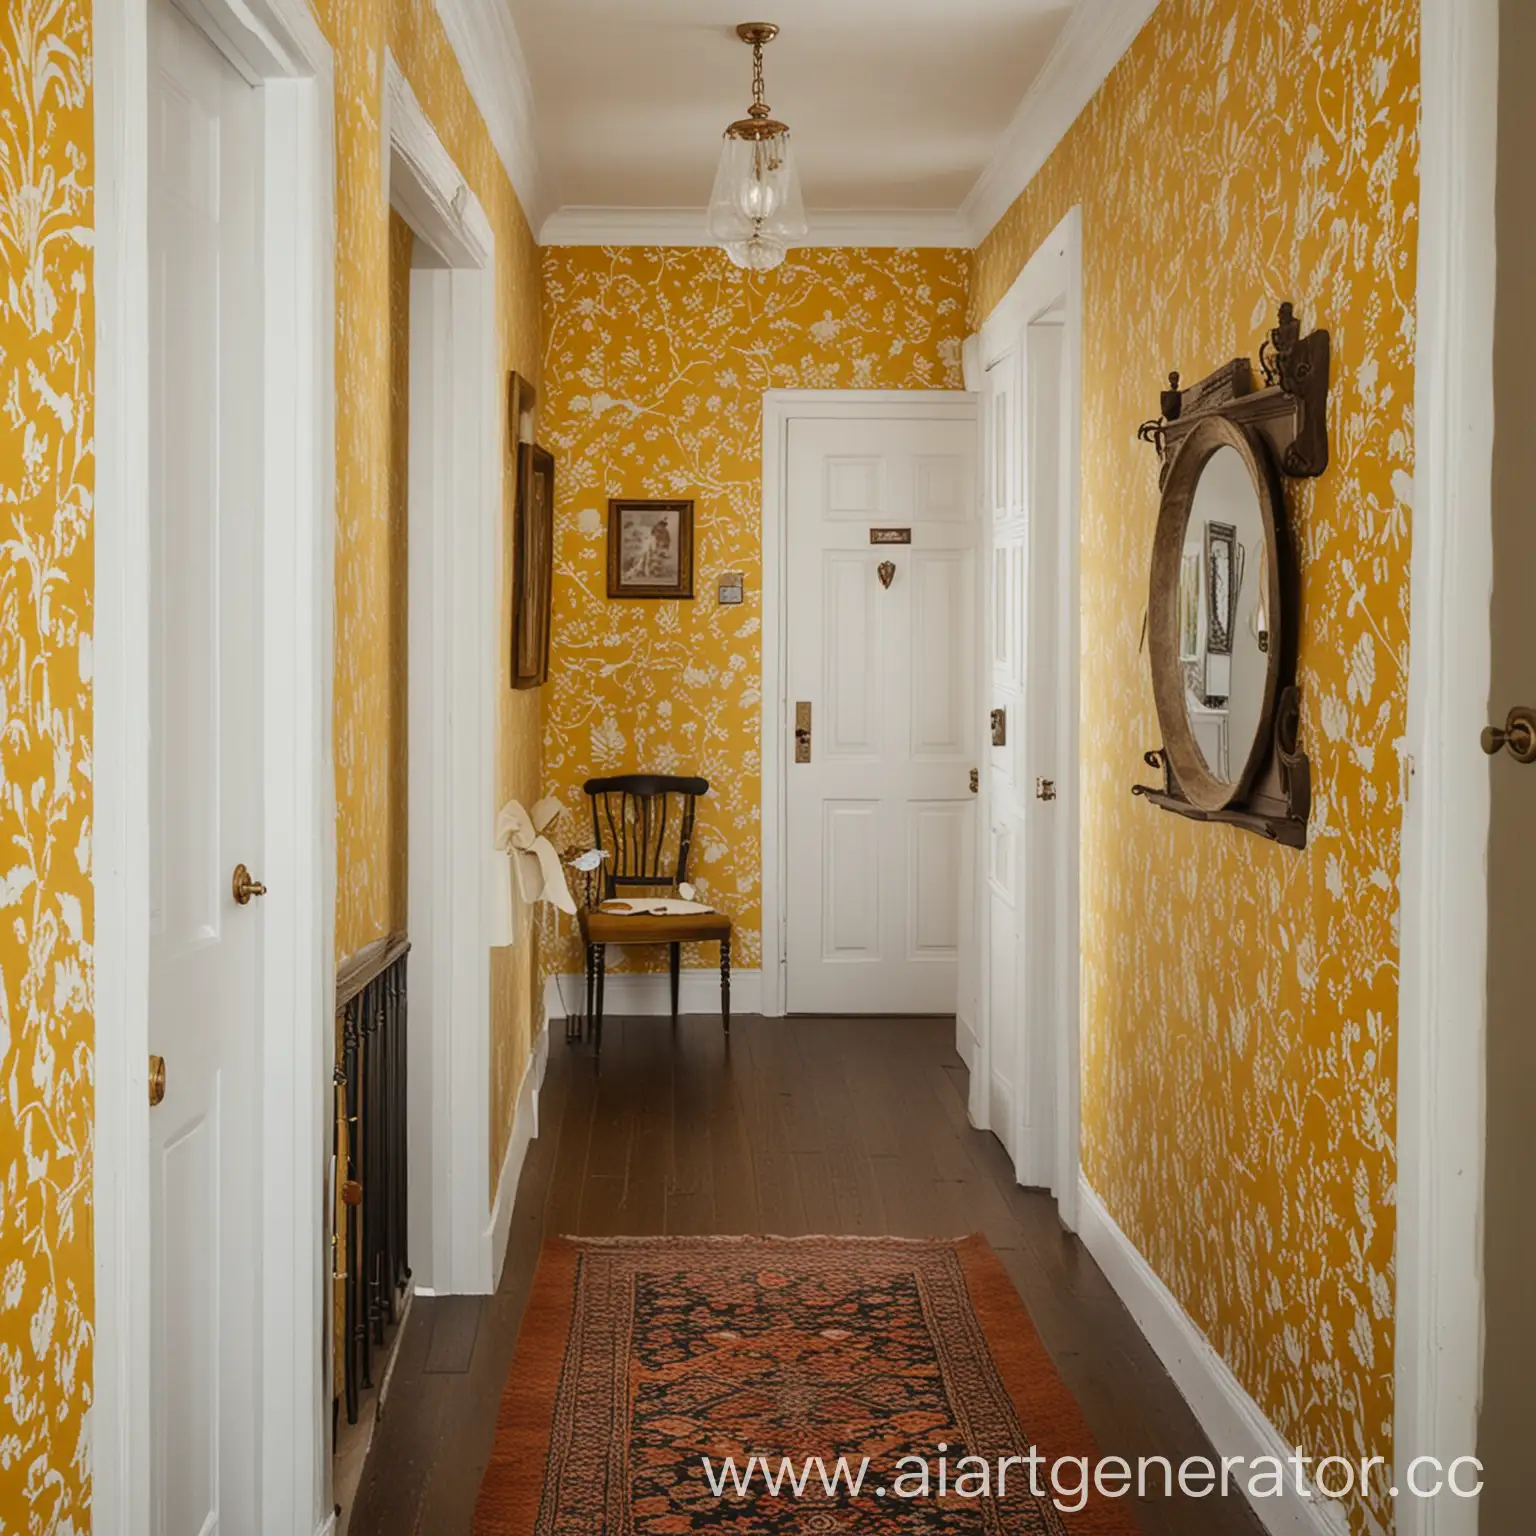 Bright-White-Door-in-a-Hallway-with-Warm-Yellow-Wallpaper